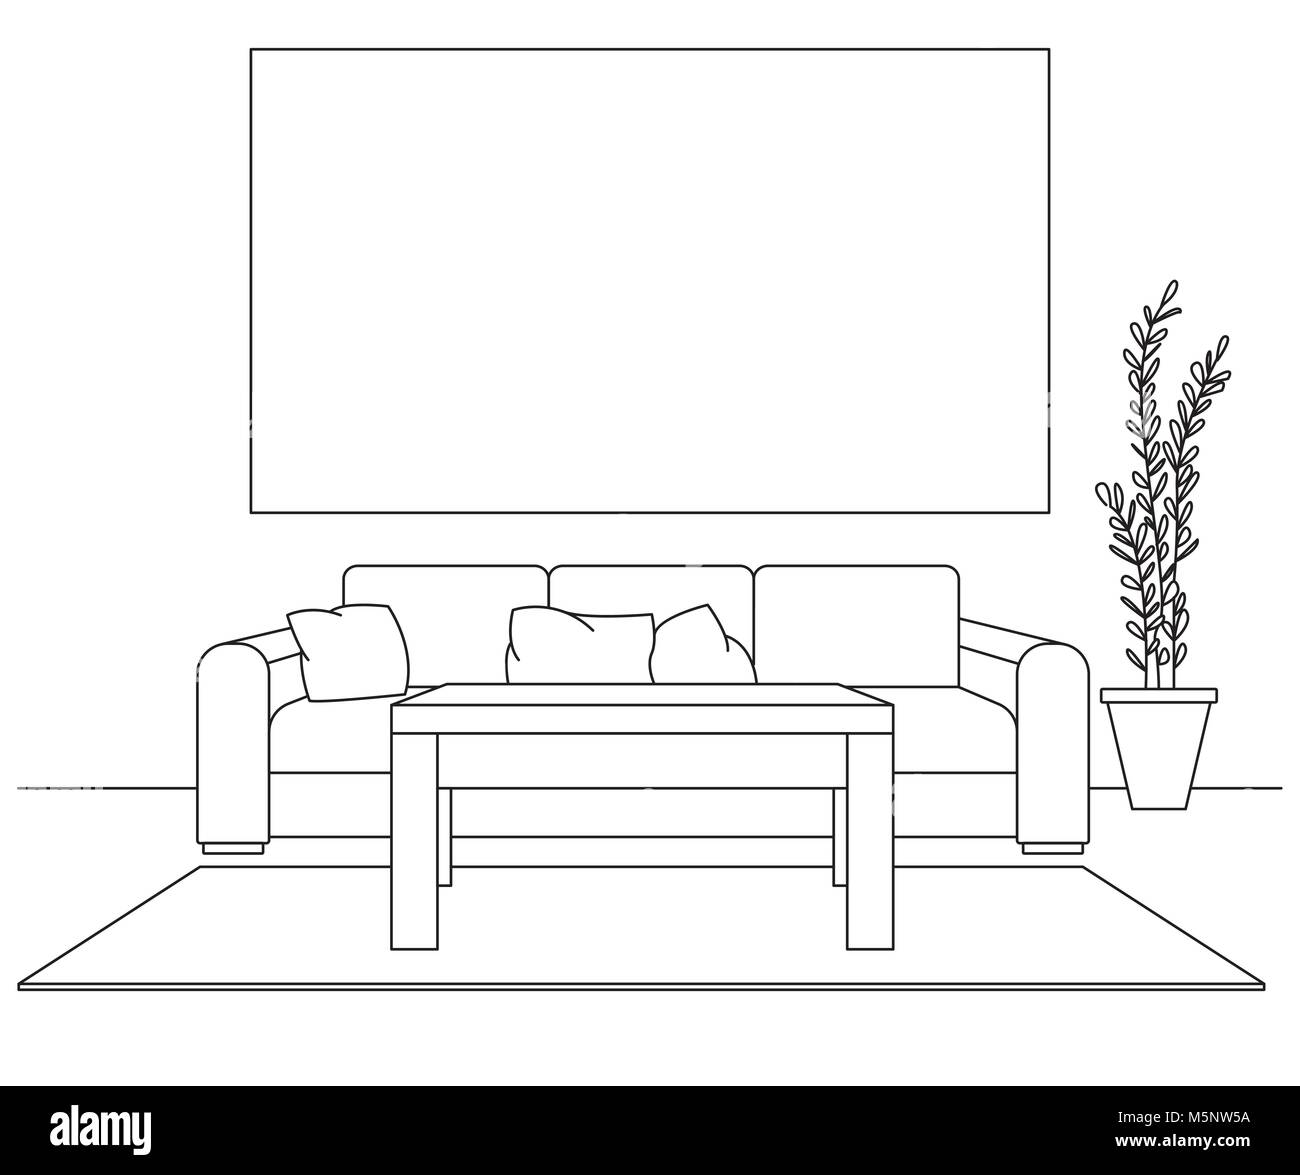 Modern interior. Sofa, lamp and bedside table. In front of the sofa is a carpet. Frame on the wall for Fitting Your information.Vector illustration in Stock Vector